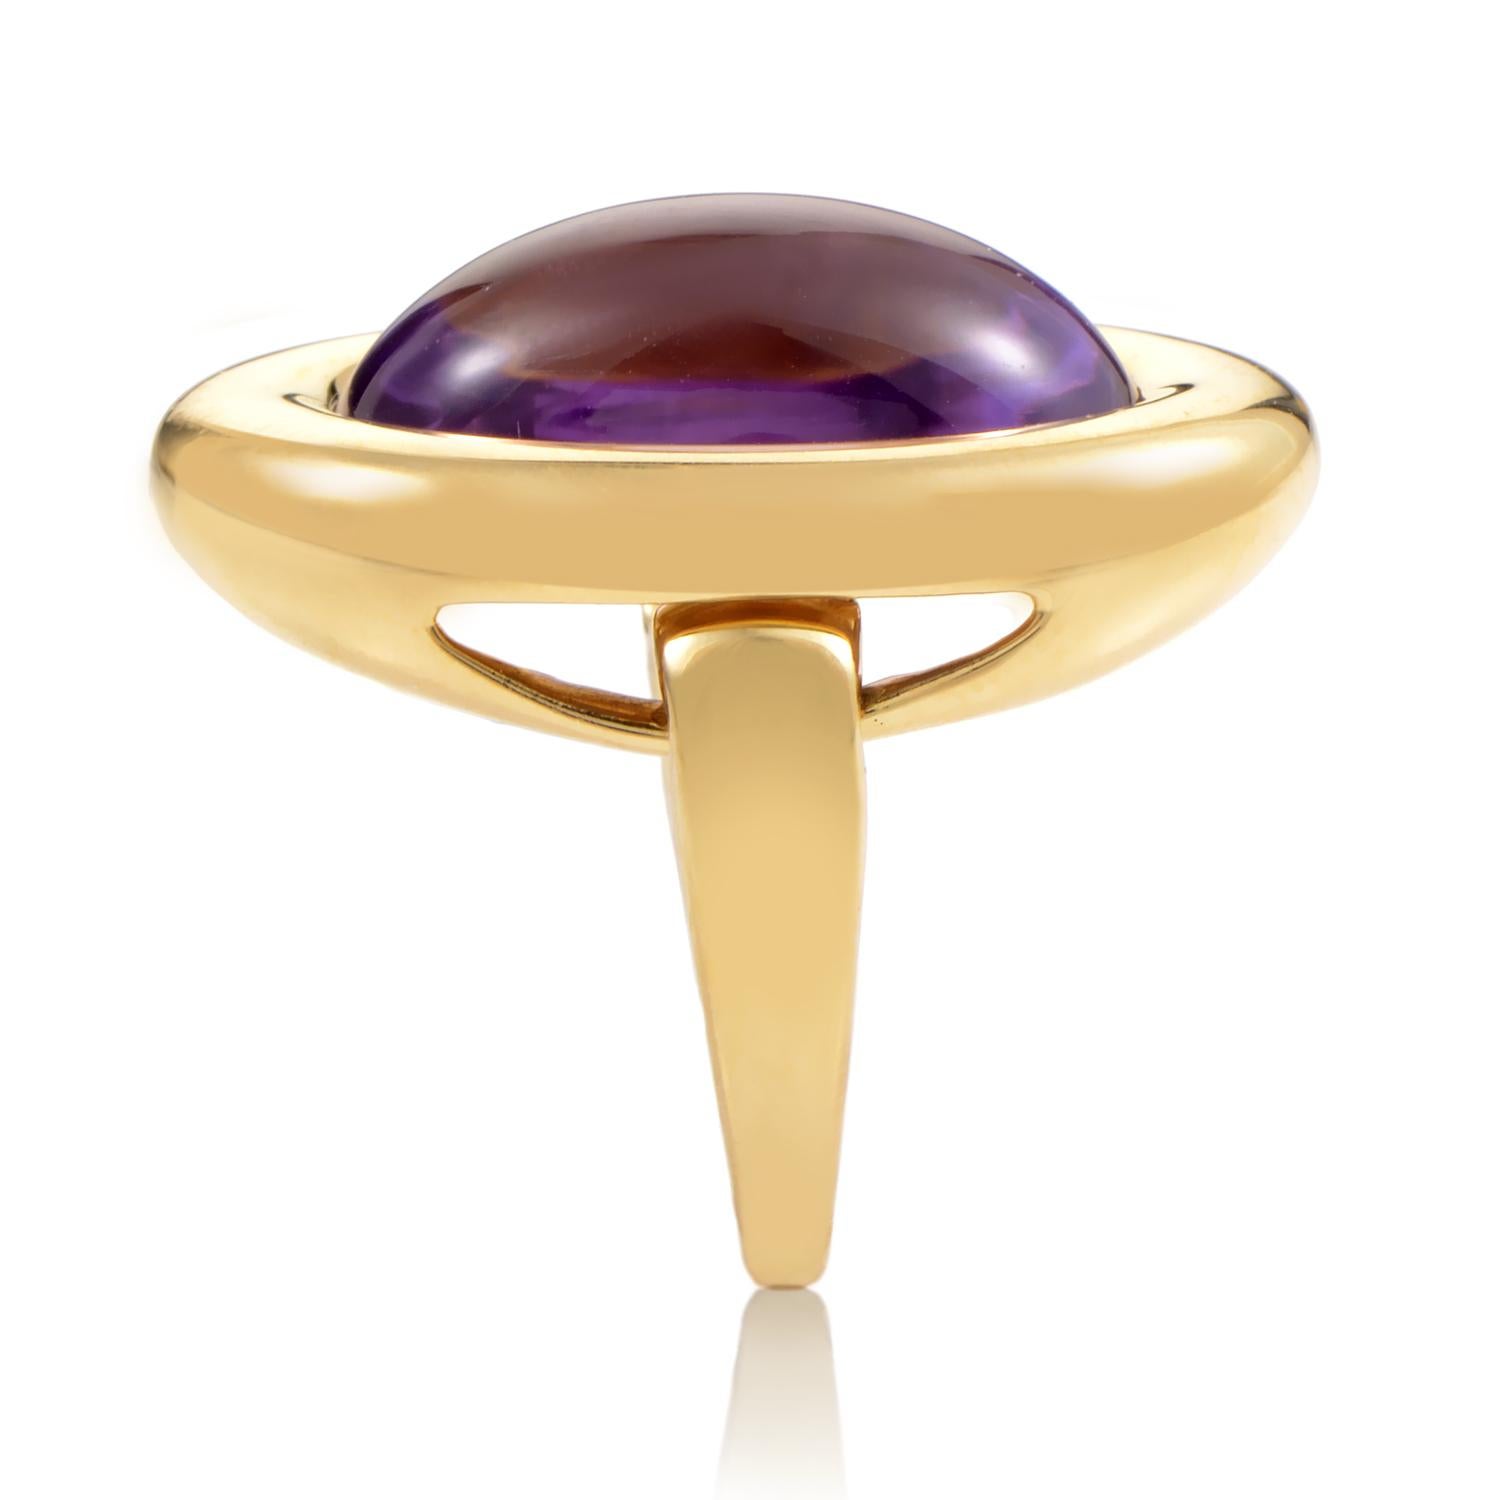 This exquisite Poiray ring is absolutely unforgettable. The ring is made of 18K yellow gold that is specially designed with hinges for a smooth, movable, quintessentially Poiray cabochon stone and setting. A stunning amethyst that totals a lavish